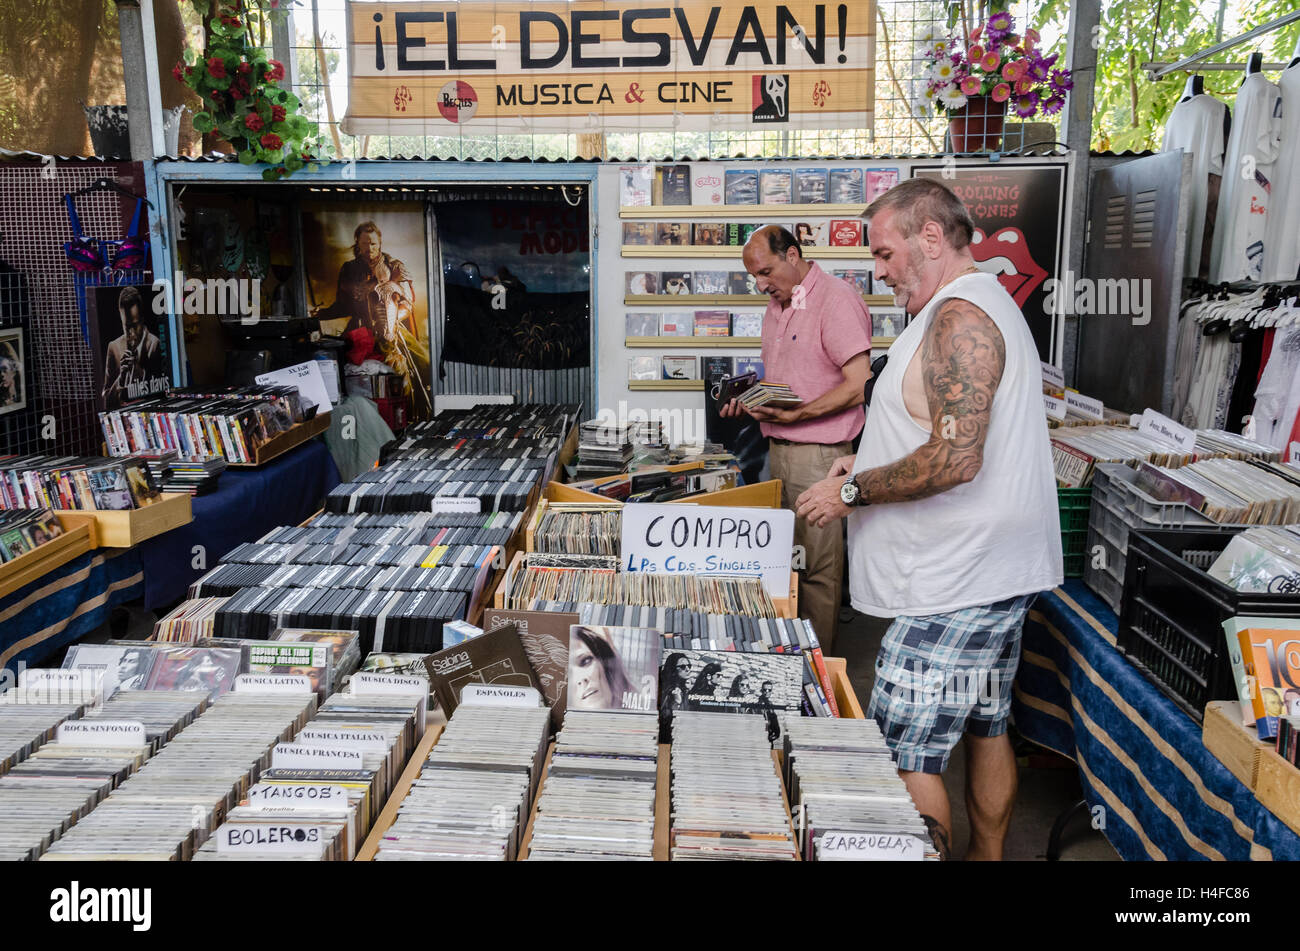 View of a music store in Albir little market, Alicante north, Spain Stock Photo